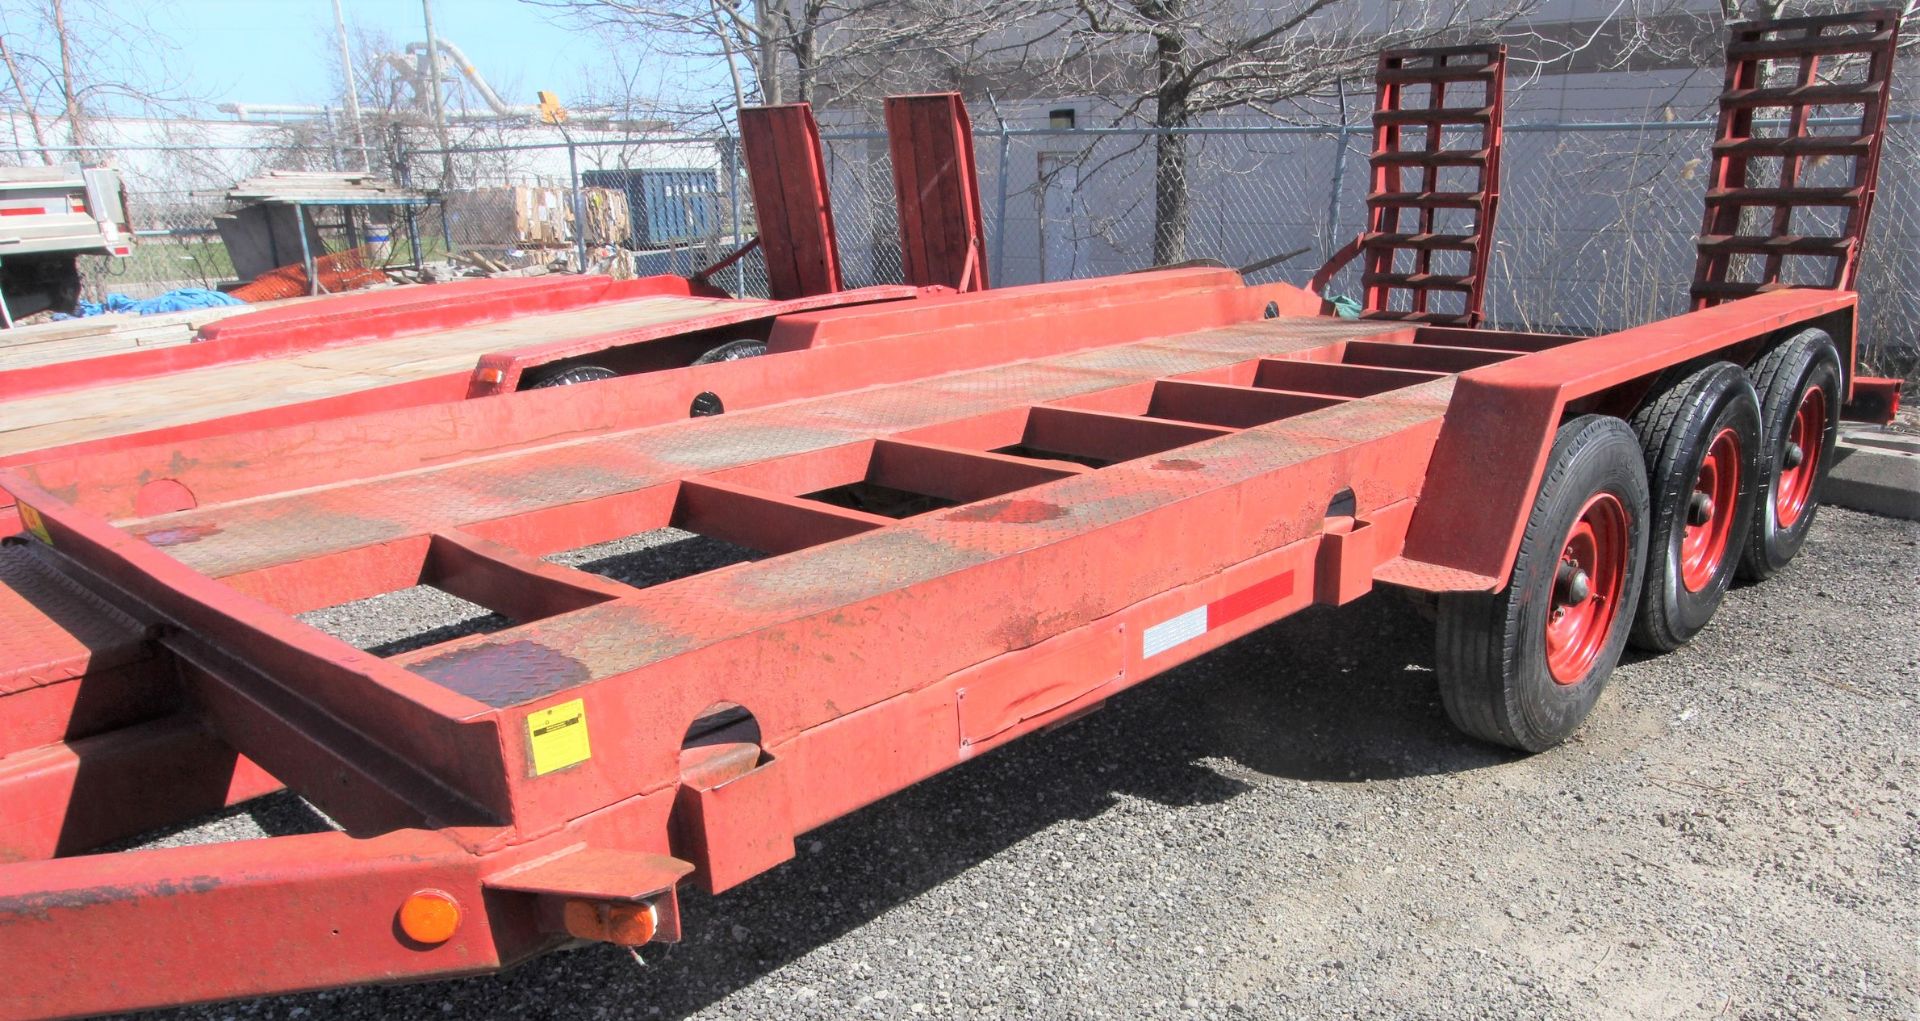 J.C. TRAILERS 16' STEEL DECK TRI-AXLE EQUIPMENT TRAILER, SPRING SUSPENSION, PIN HITCH, BEAVERTAILS - Image 6 of 9